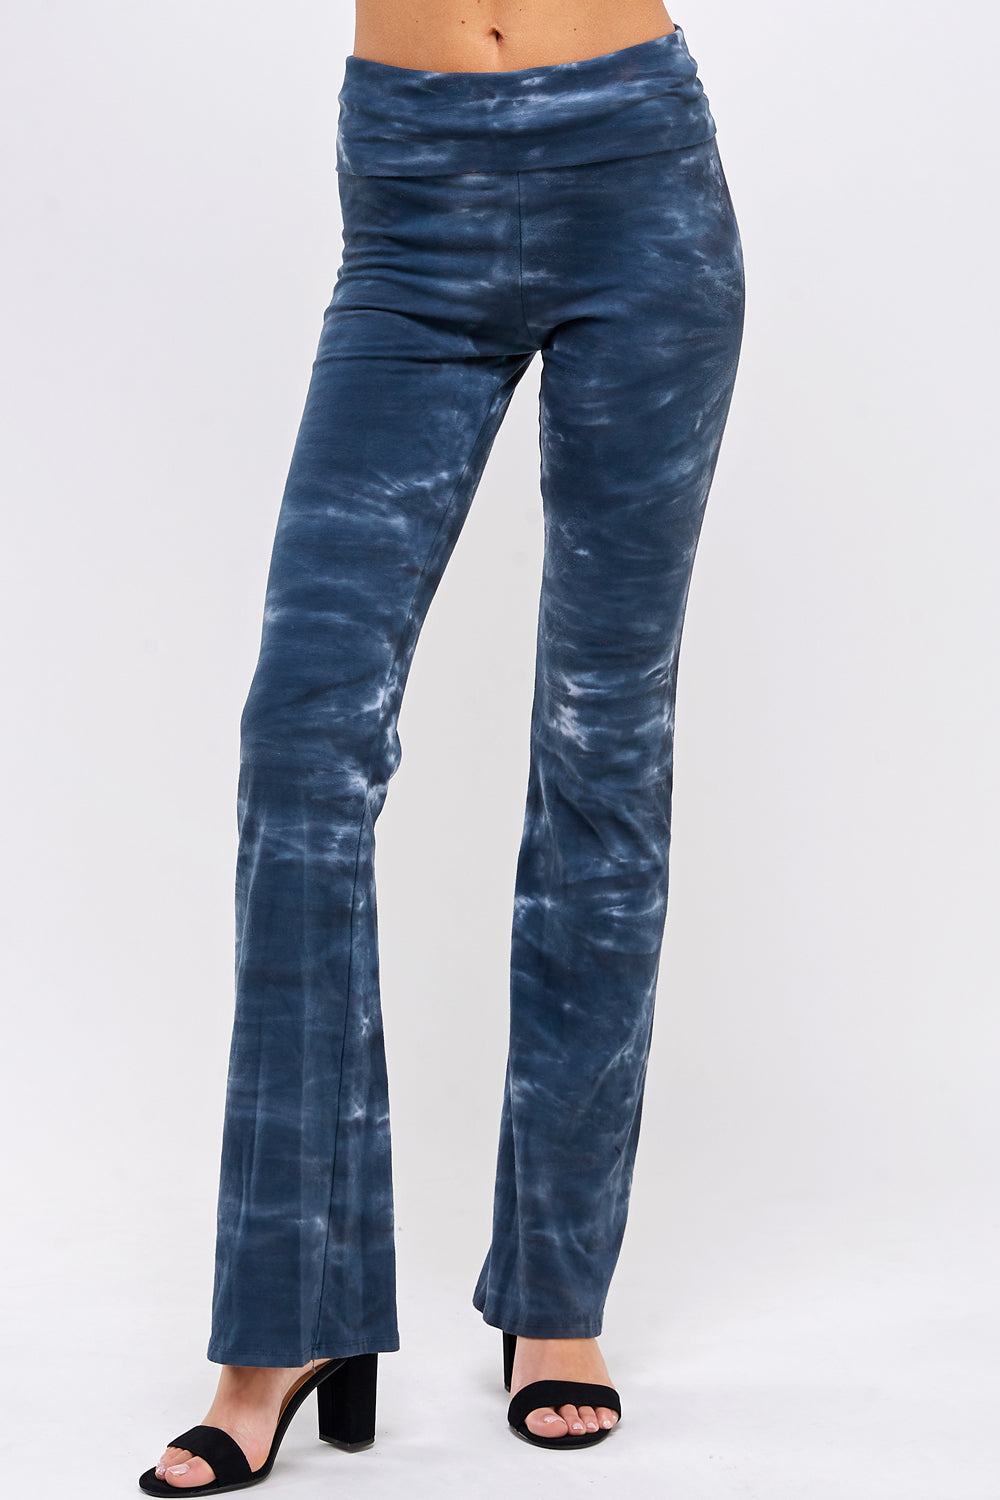 front side yoga pant Denim Blue two tone Crystal Wave straight-leg yoga pant fit is comfortable and flattering